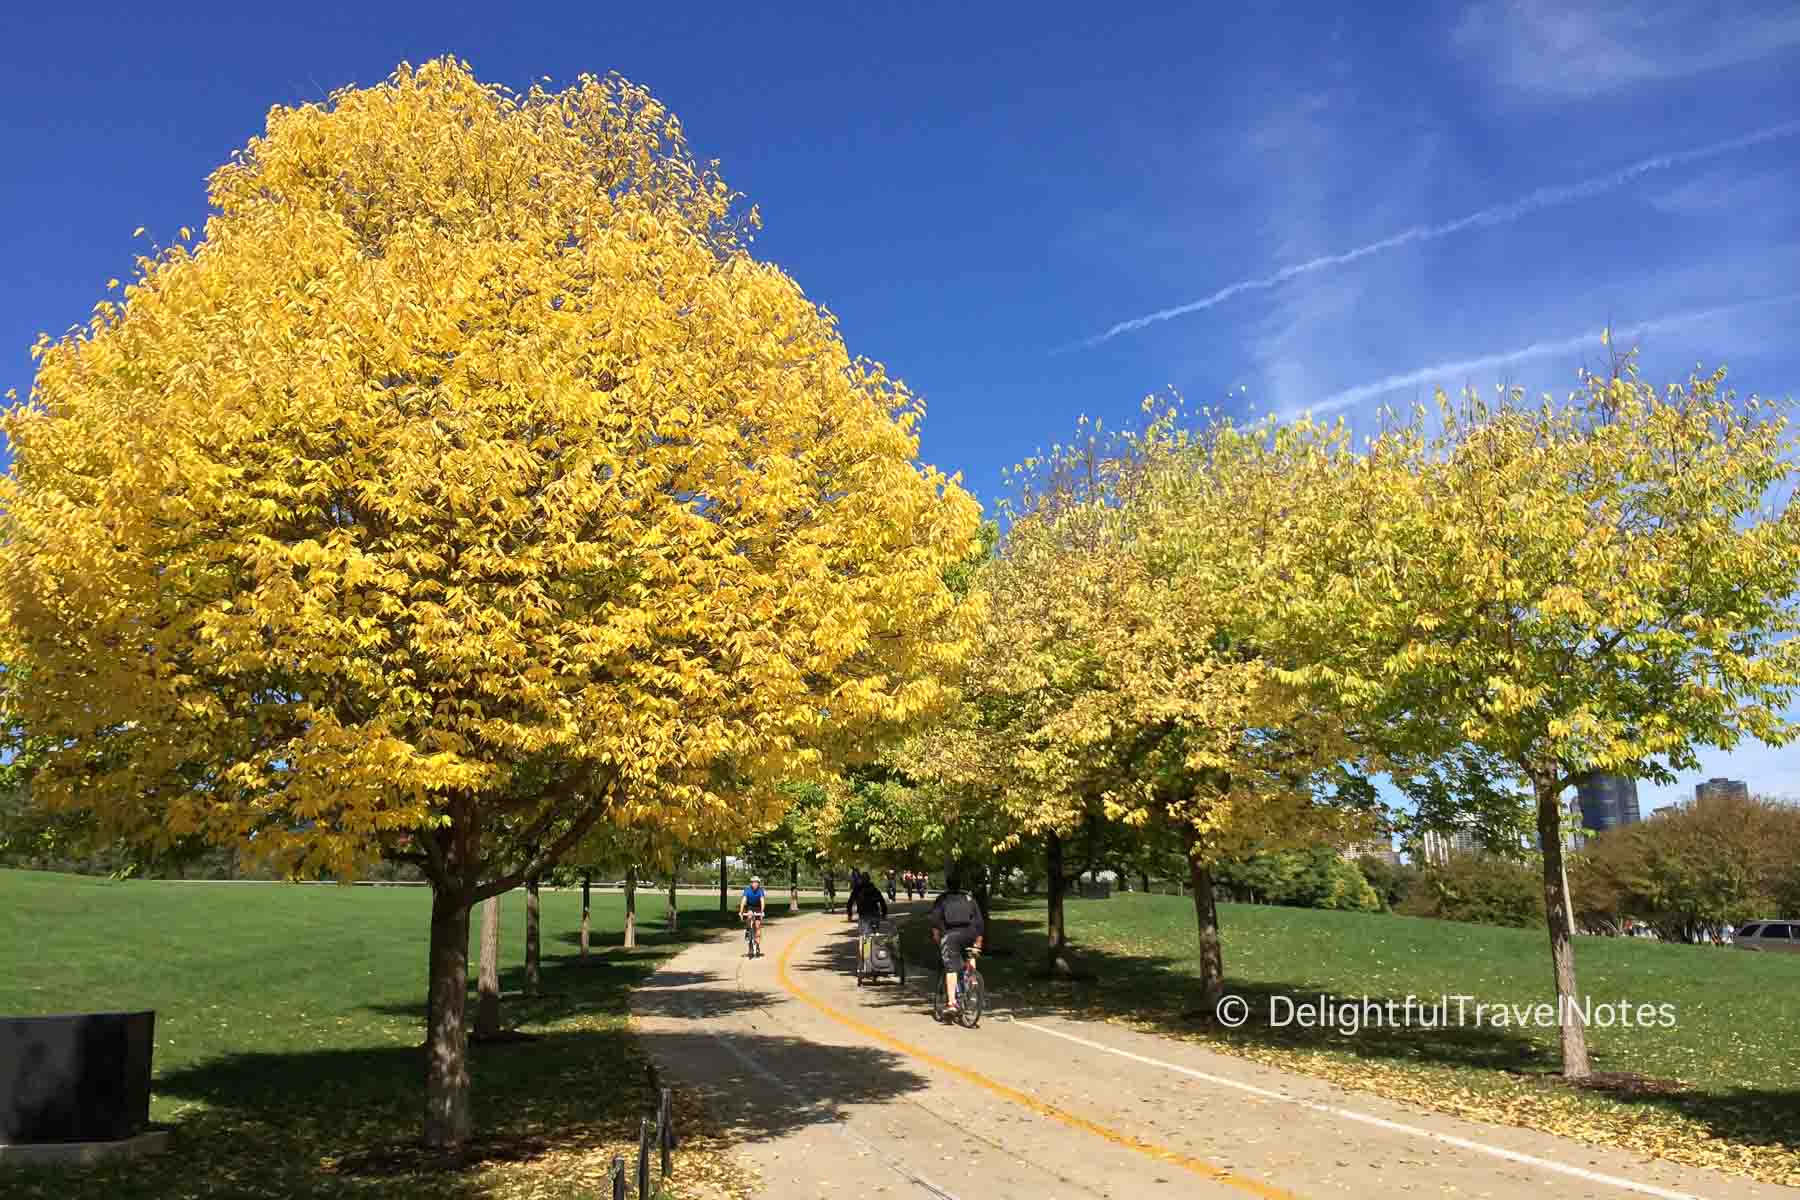 Fall foliage at Grant Park in Chicago Illinois.